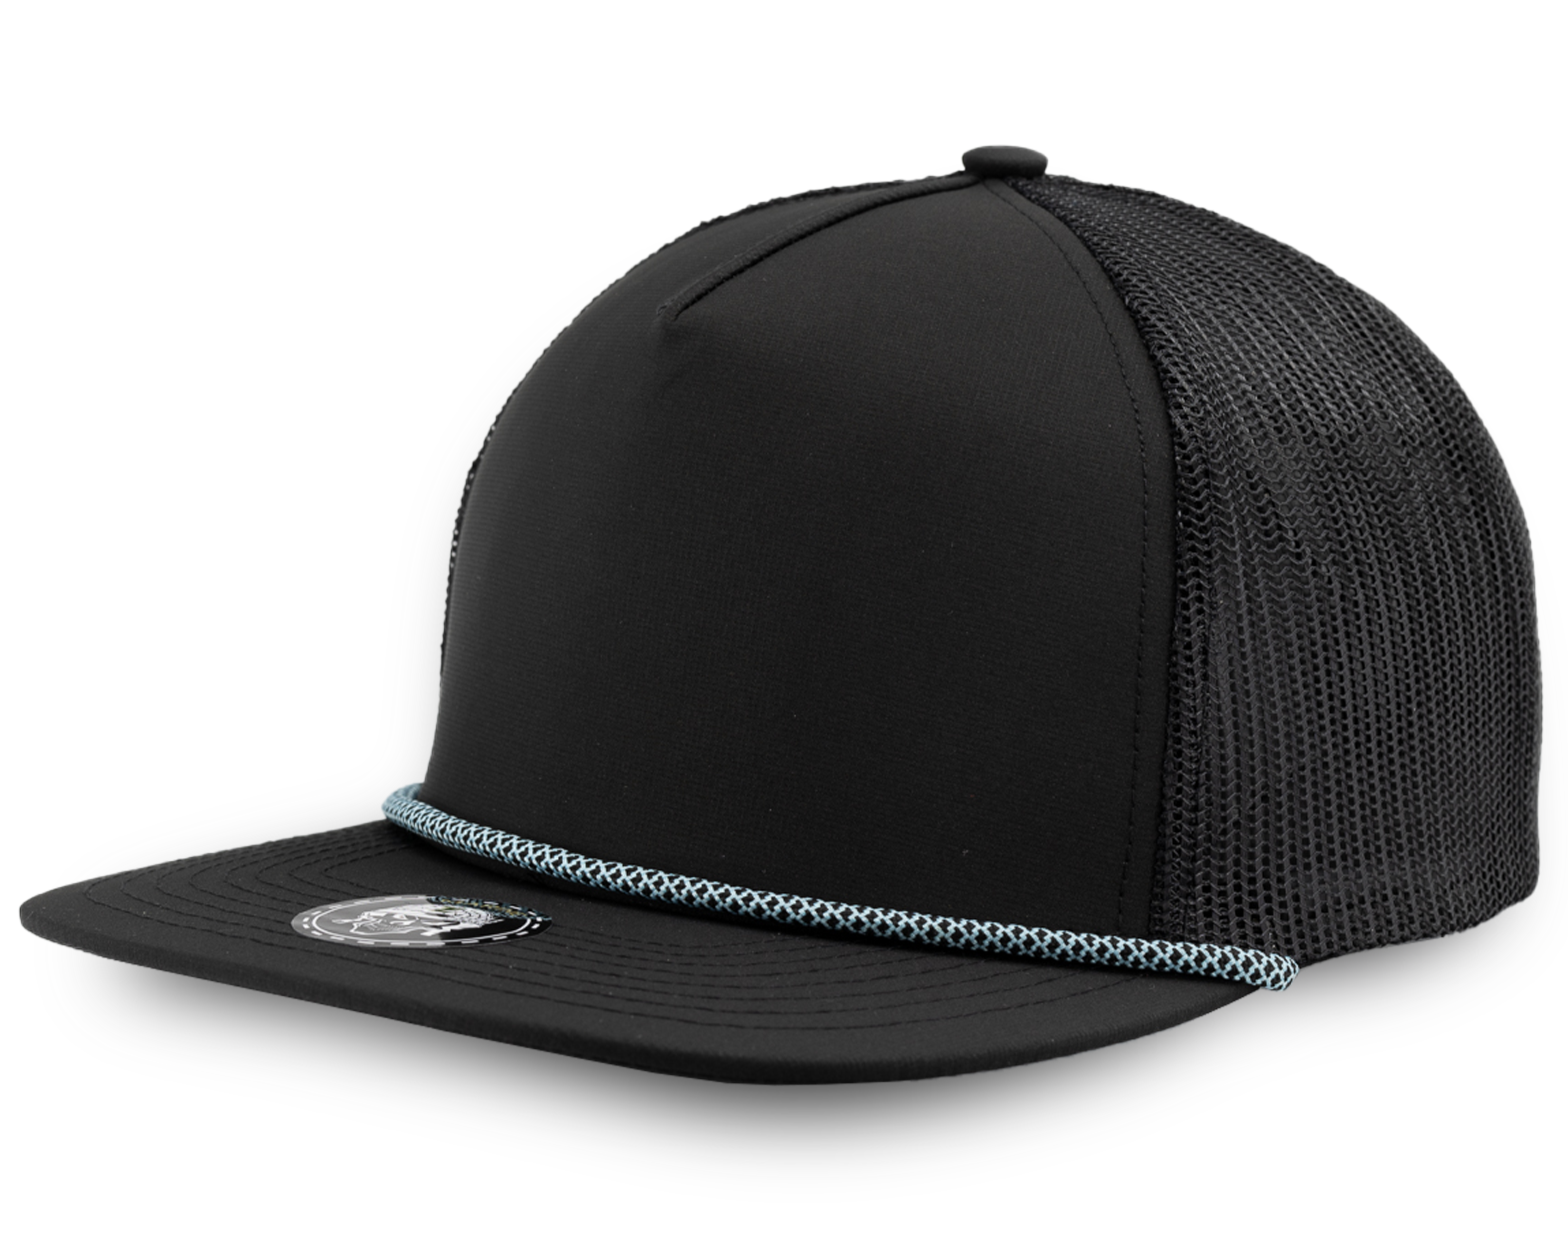 MARINE R+ (Rope brim)-Water Repellent hat-Zapped Headwear-Black/Chainlink Blue rope-Zapped Headwear-Golf hat- Rope brim hat- rope hat- snapback- custom hat